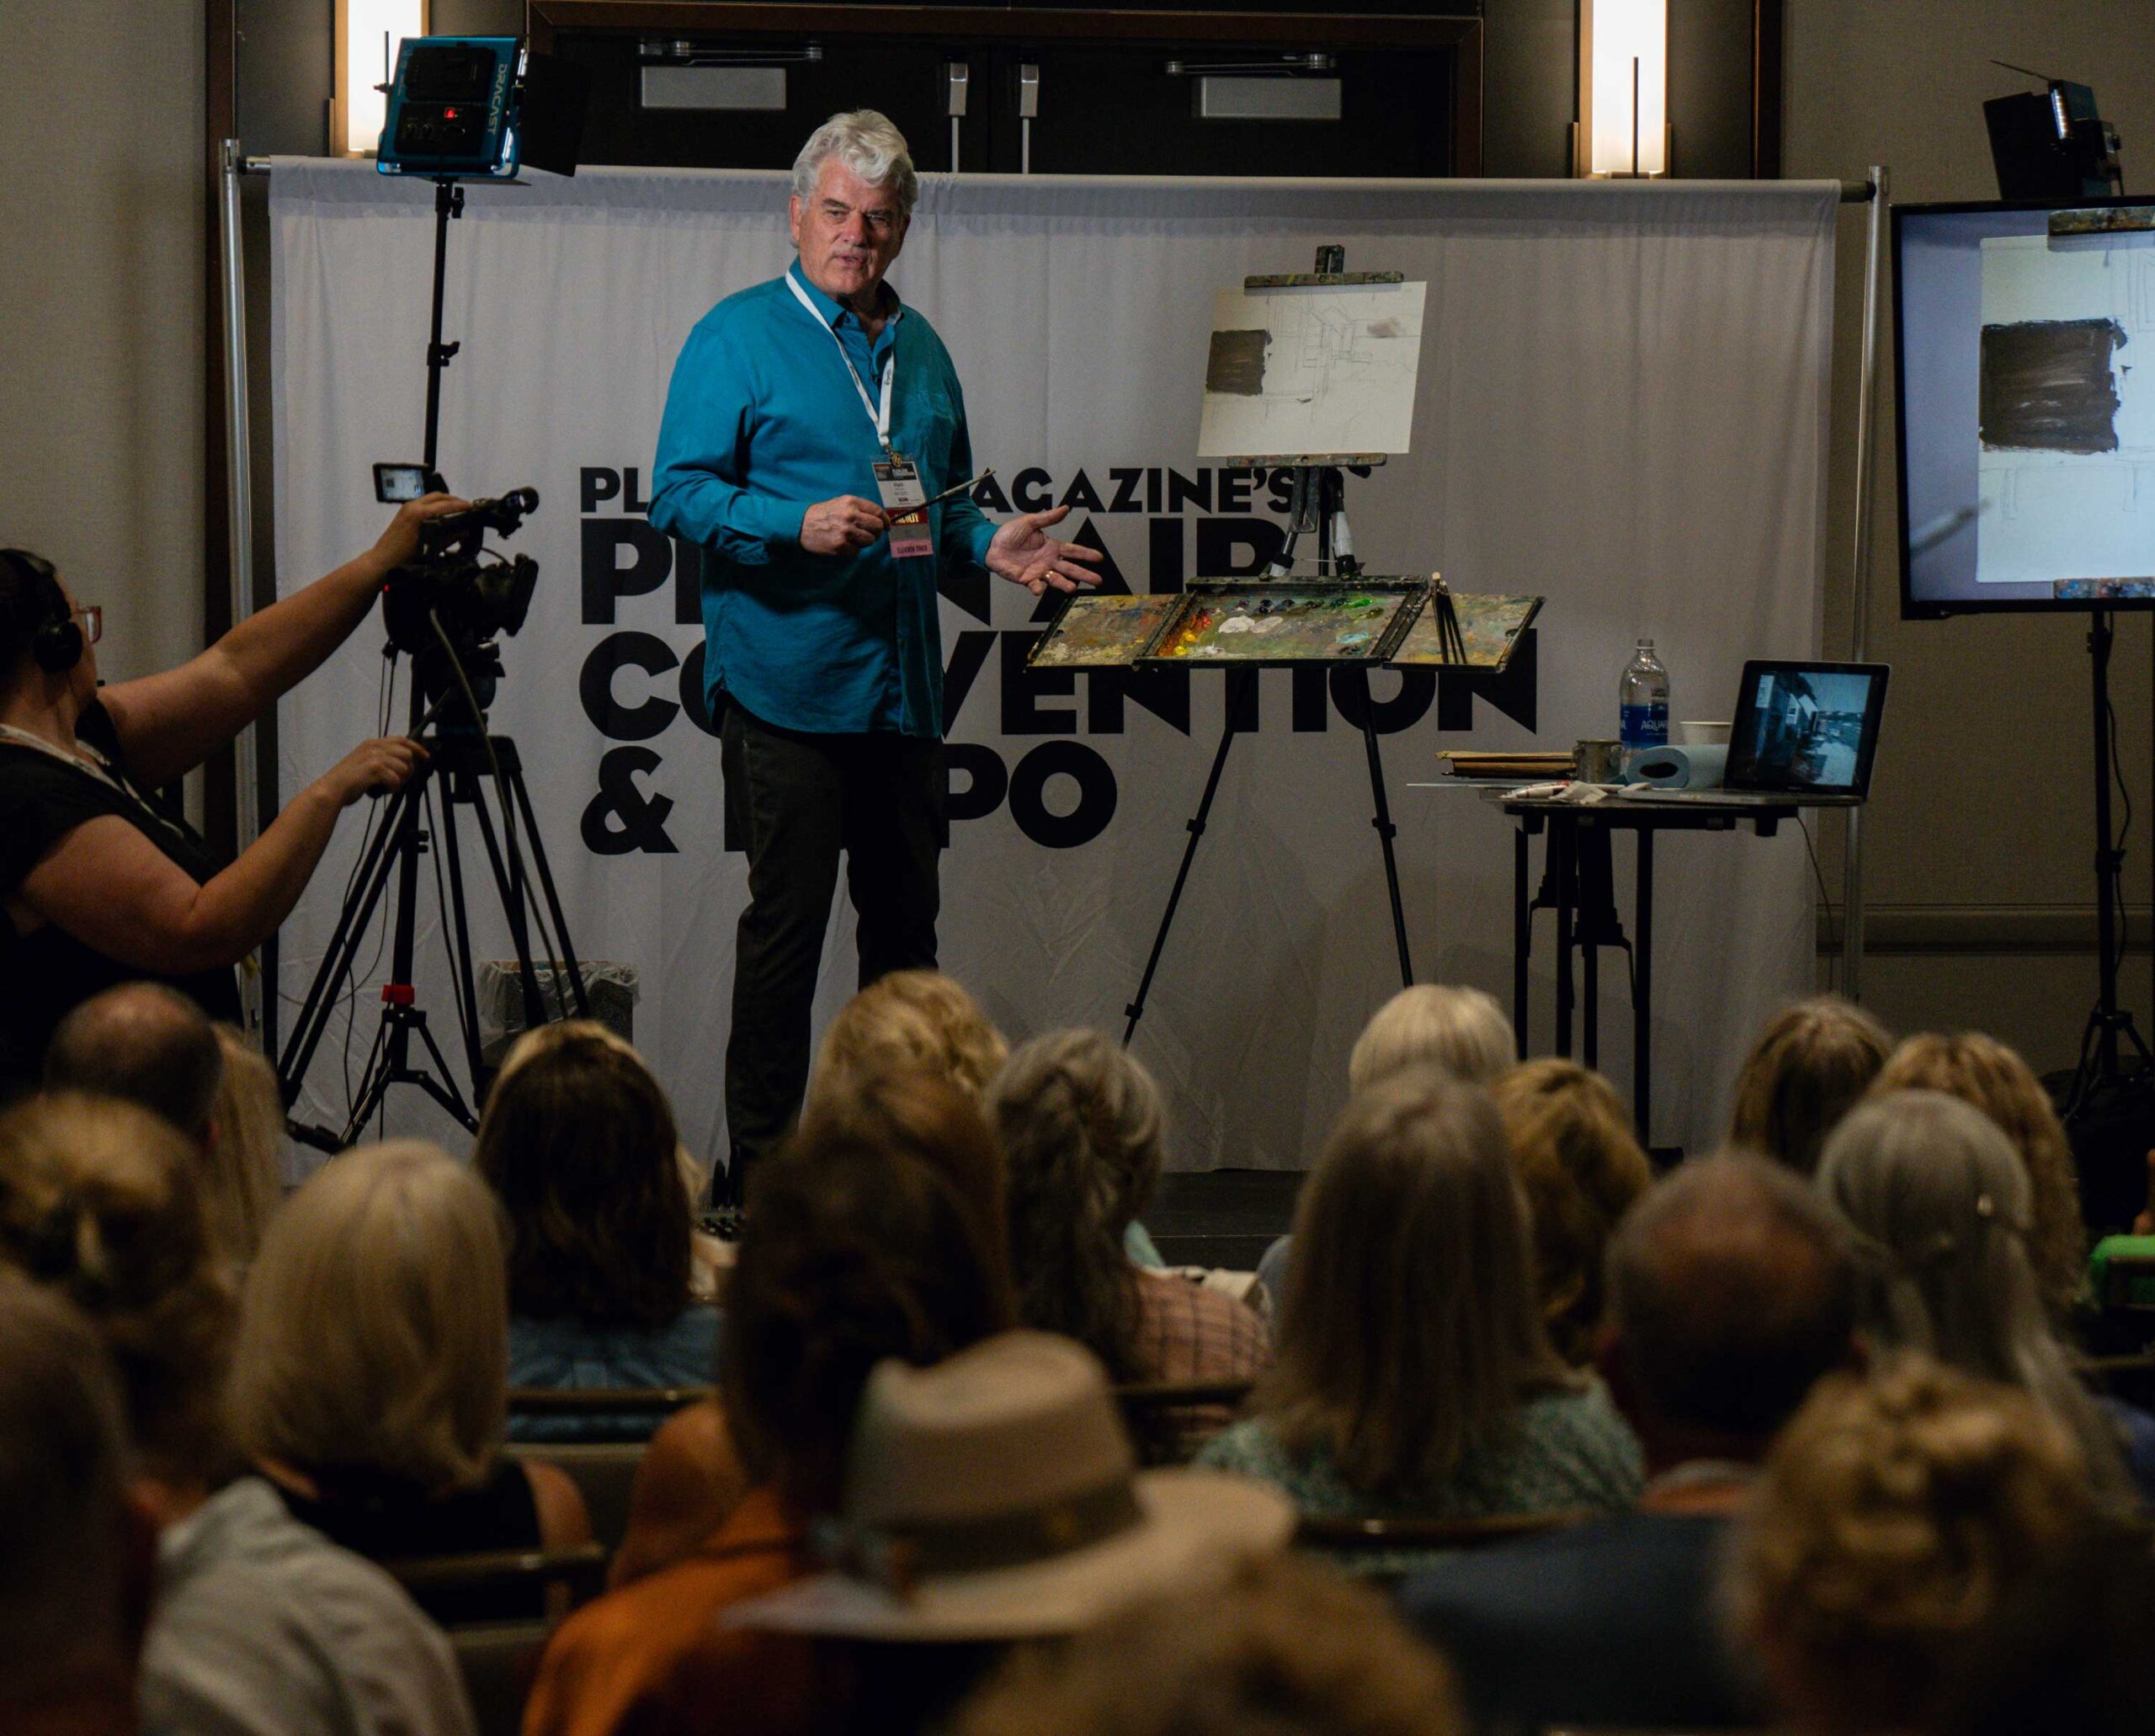 Plein Air Convention - From “Build a Foundation for a Great Painting” with Mark Fehlman